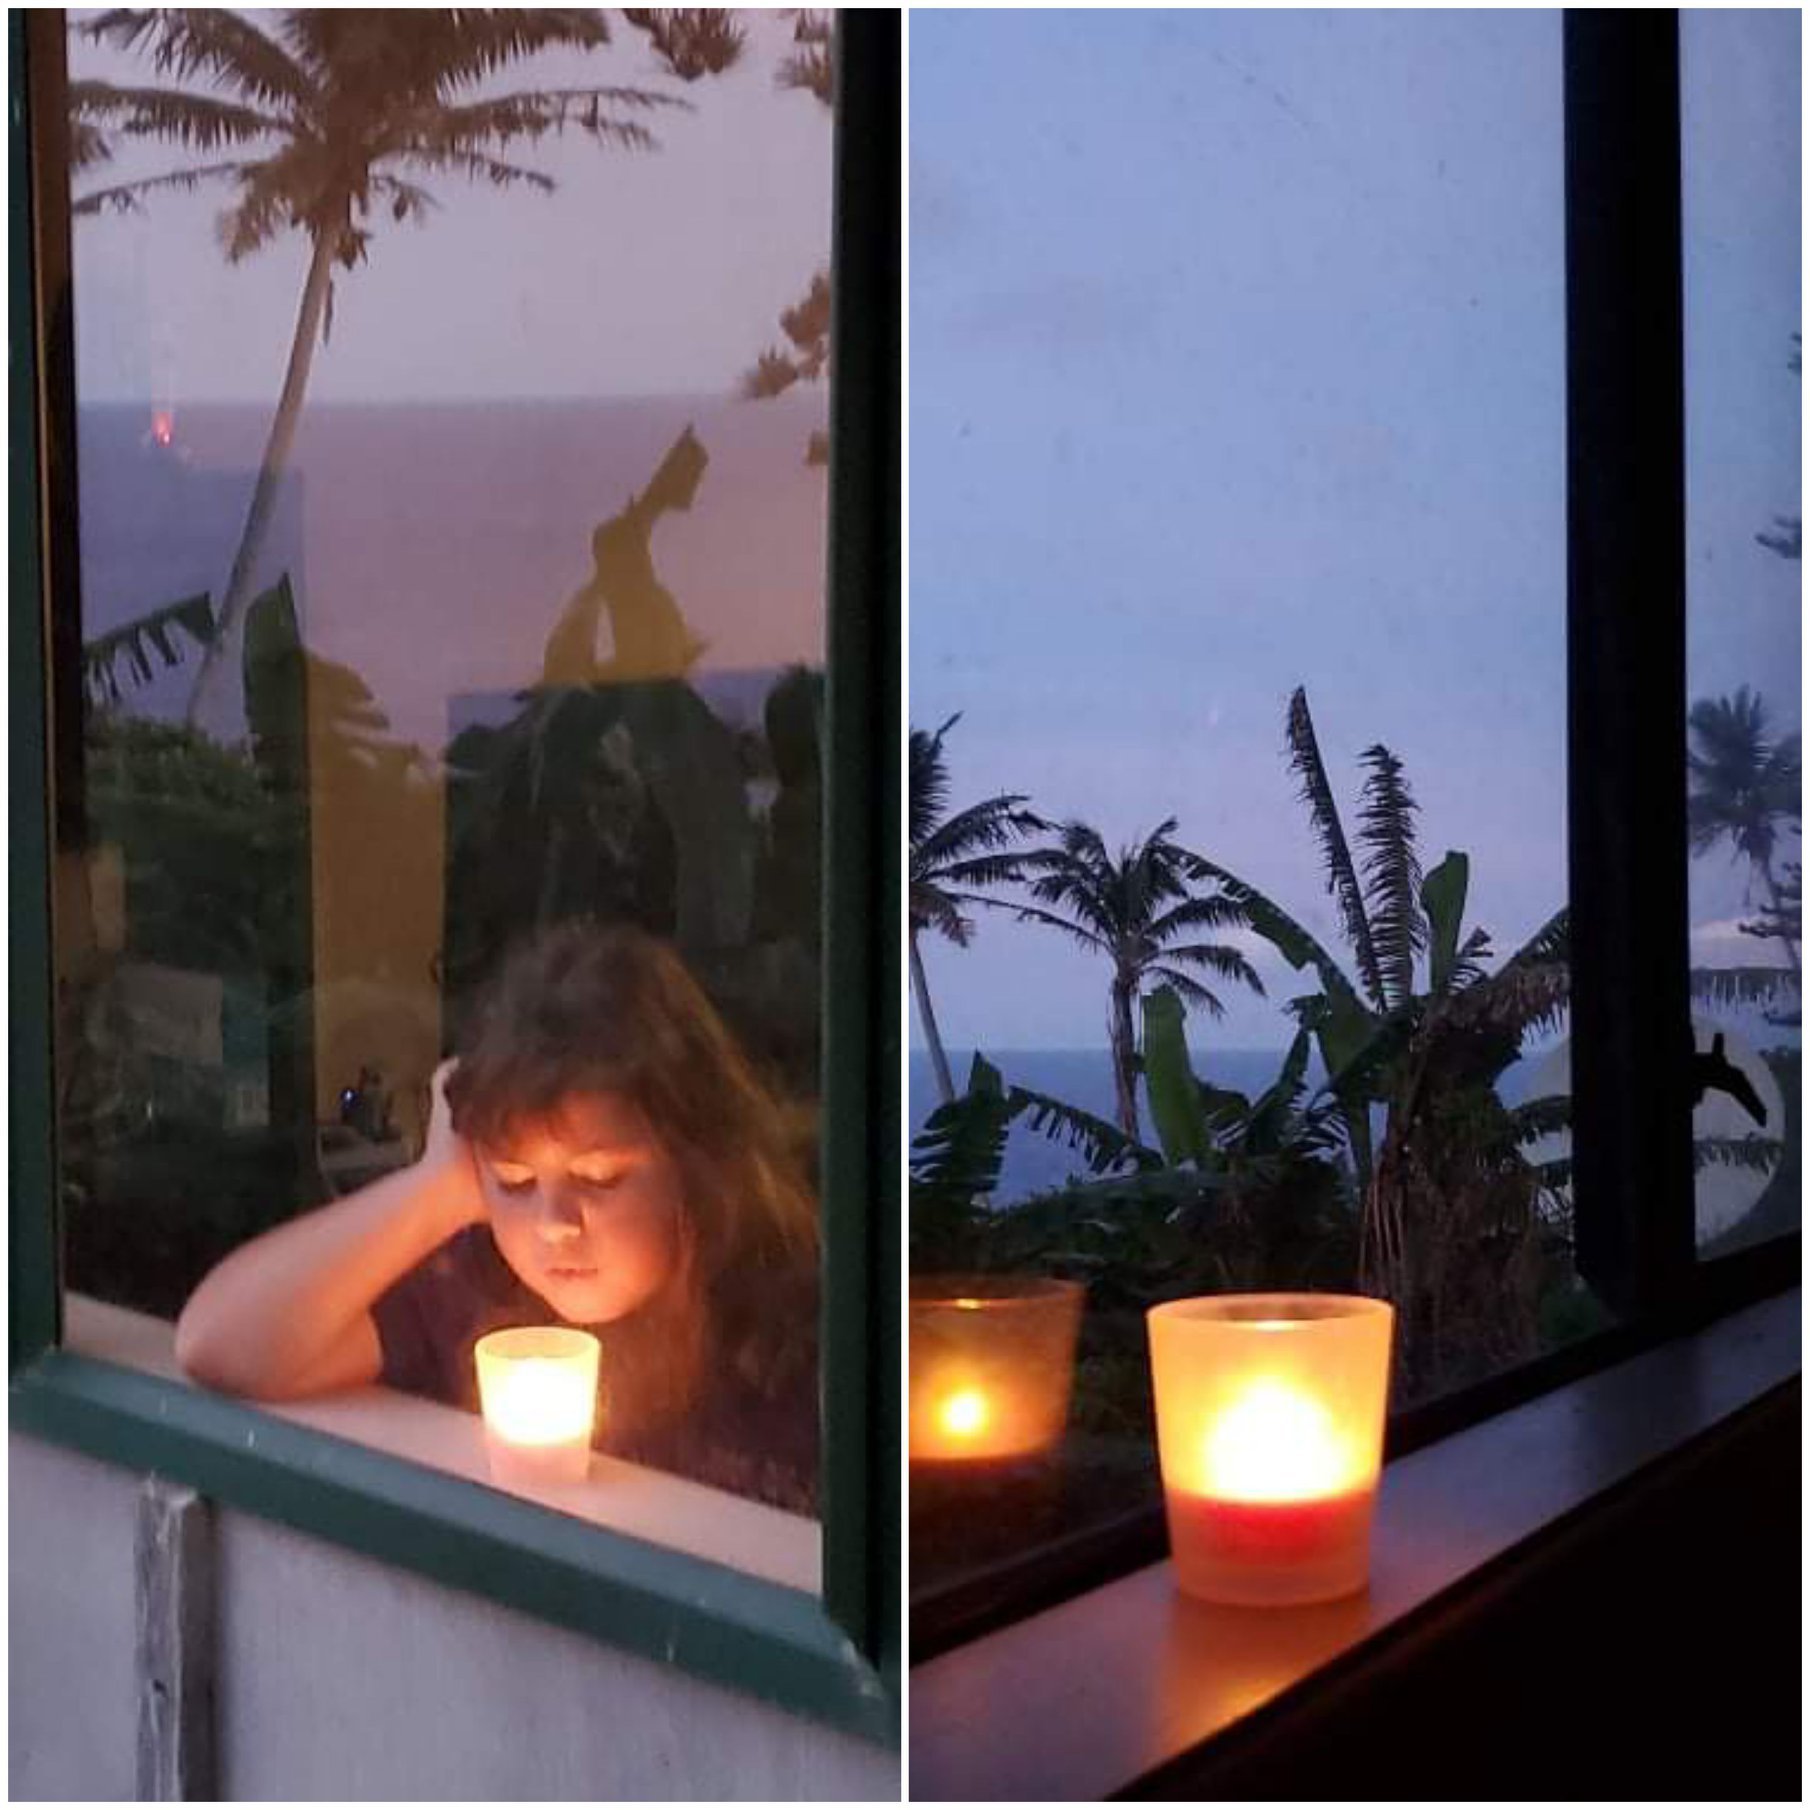 From their home on Pitcairn Nadine Christian and her daughters Adrianna and Isabel have a Candle in the Window